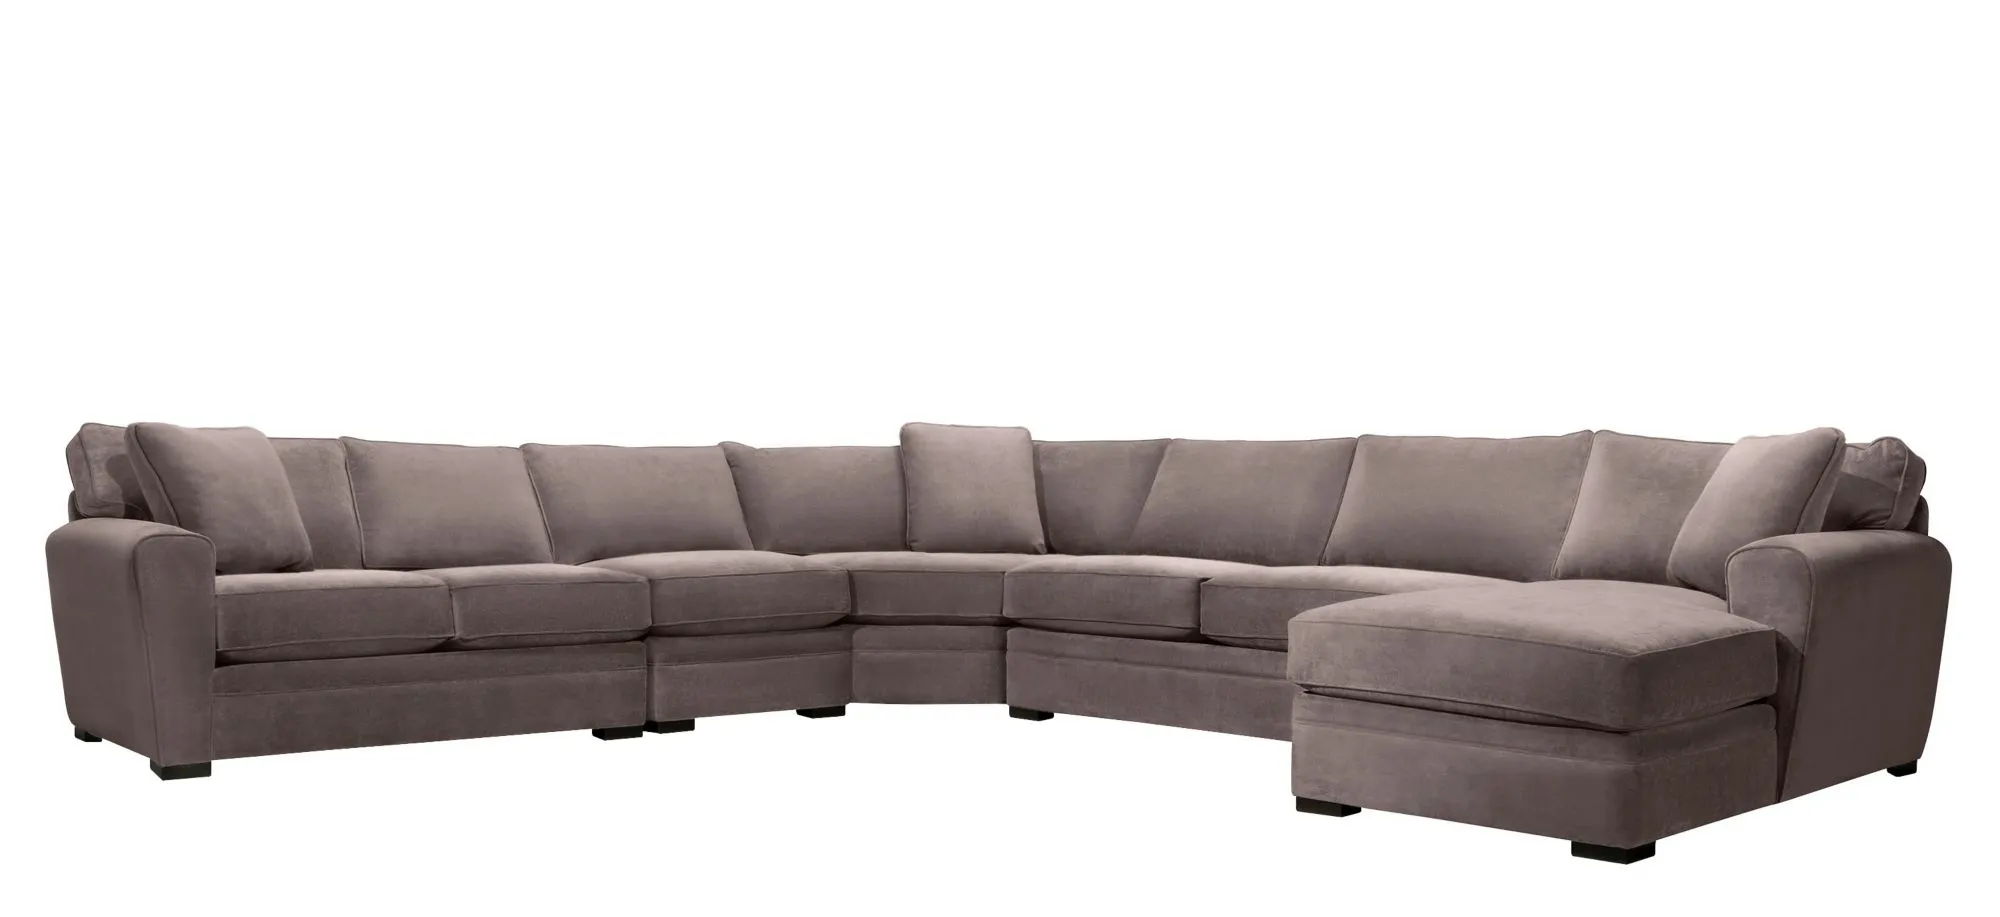 Artemis II 5-pc. Right Hand Facing Sectional Sofa in Gypsy Truffle by Jonathan Louis